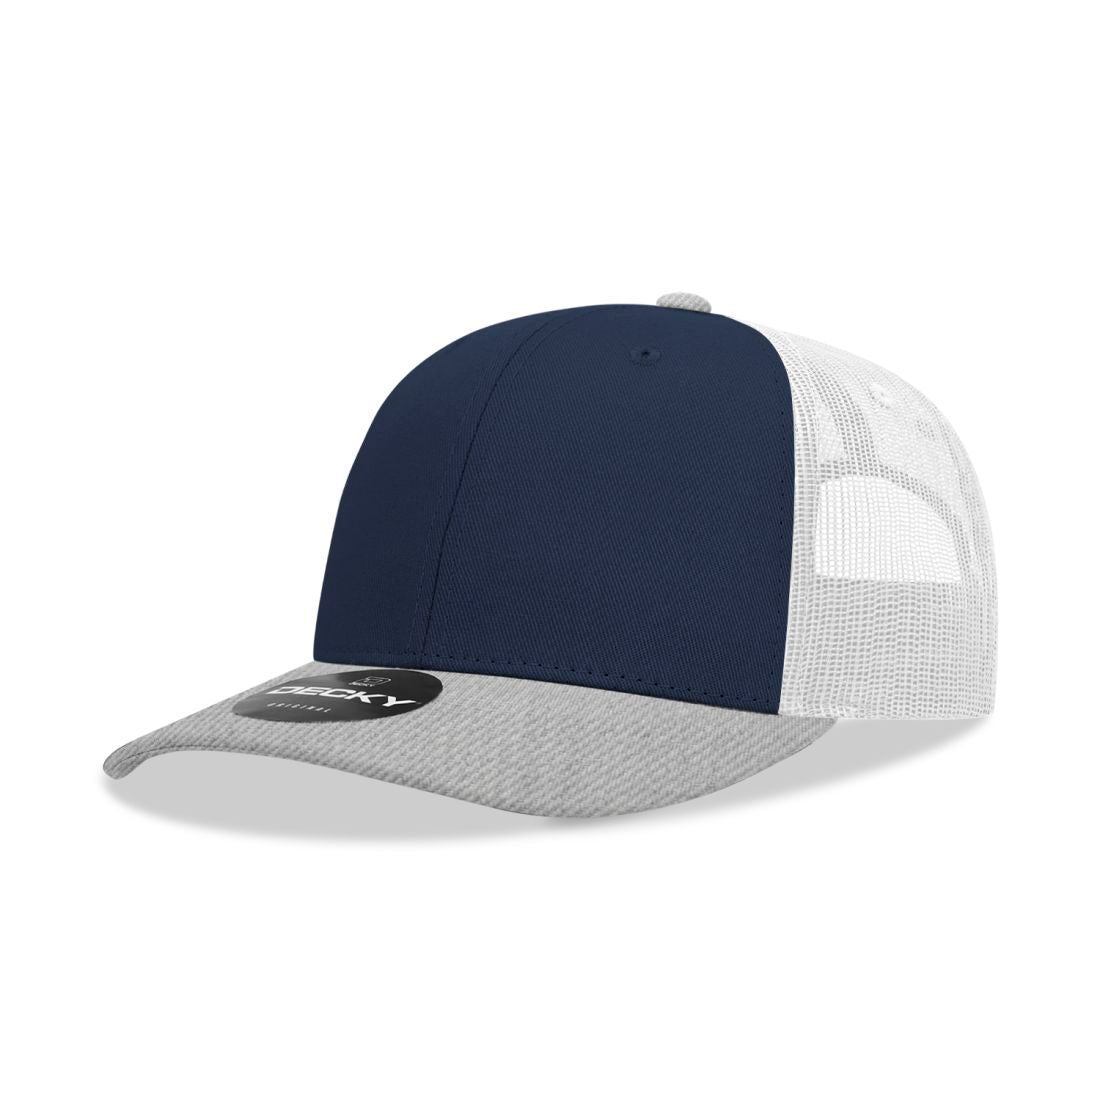 Heather Grey/Navy/White color variant